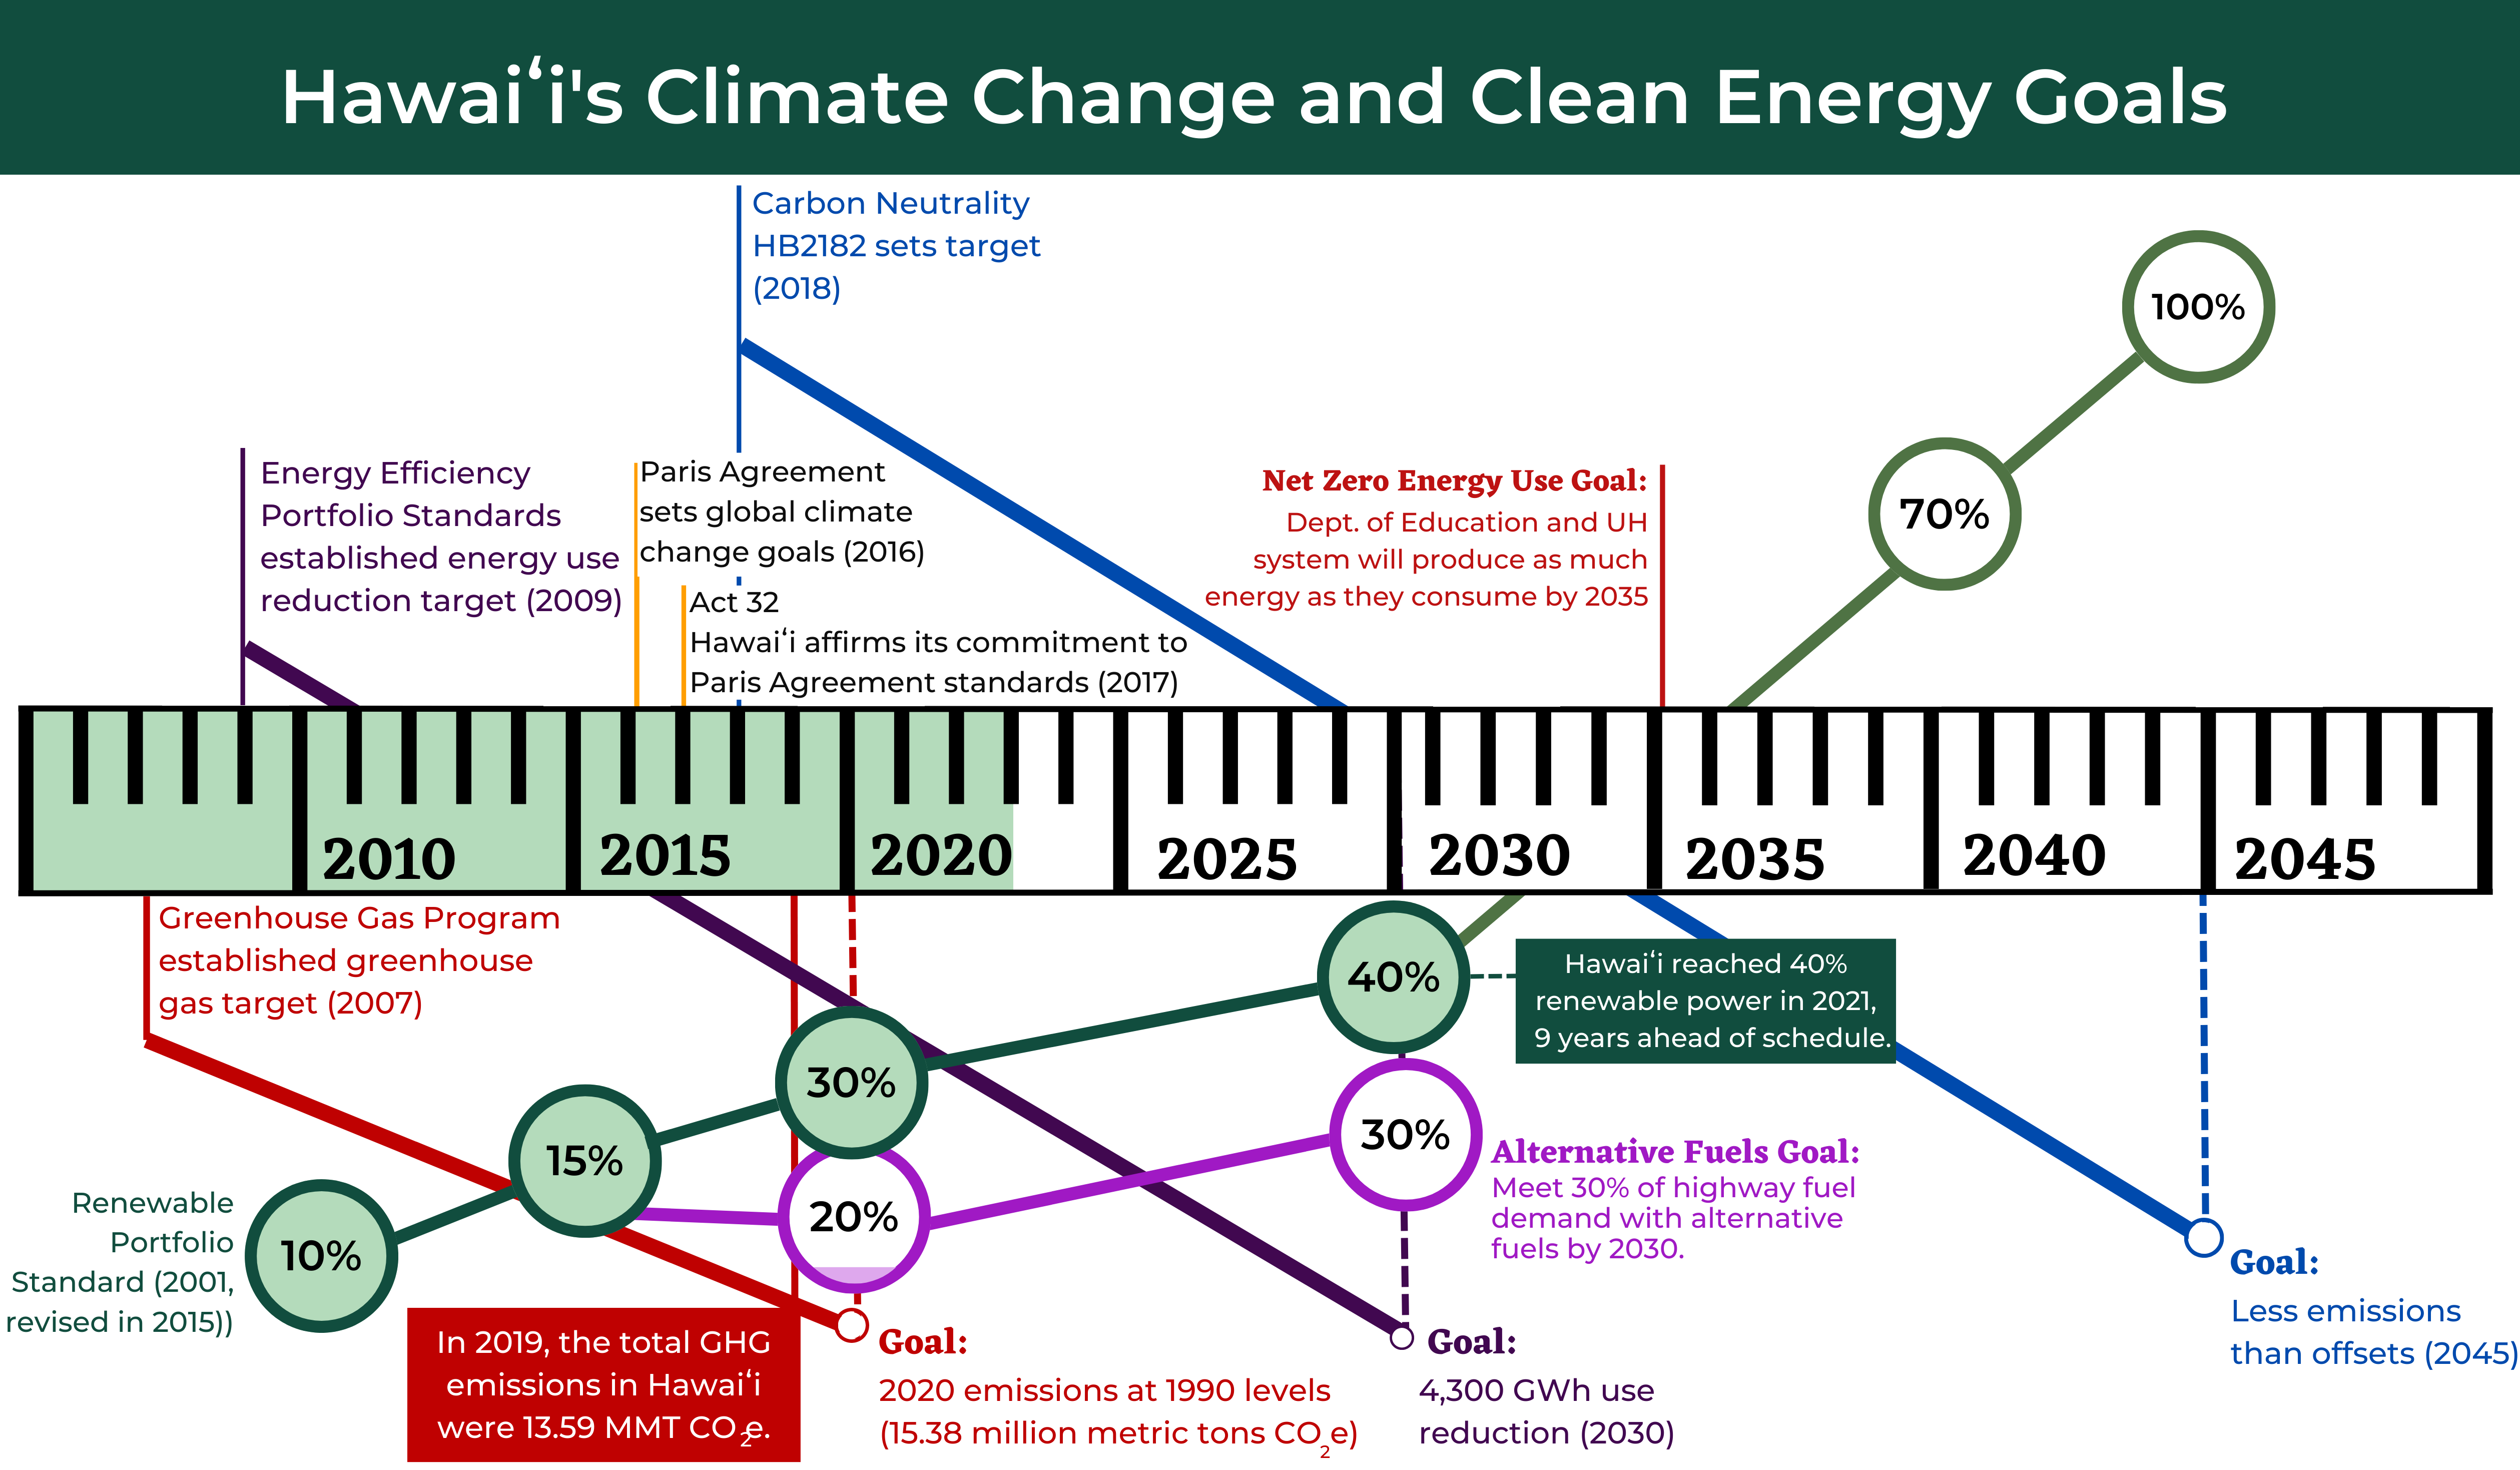 Hawaii's Climate Change and Clean Energy Goal Timeline